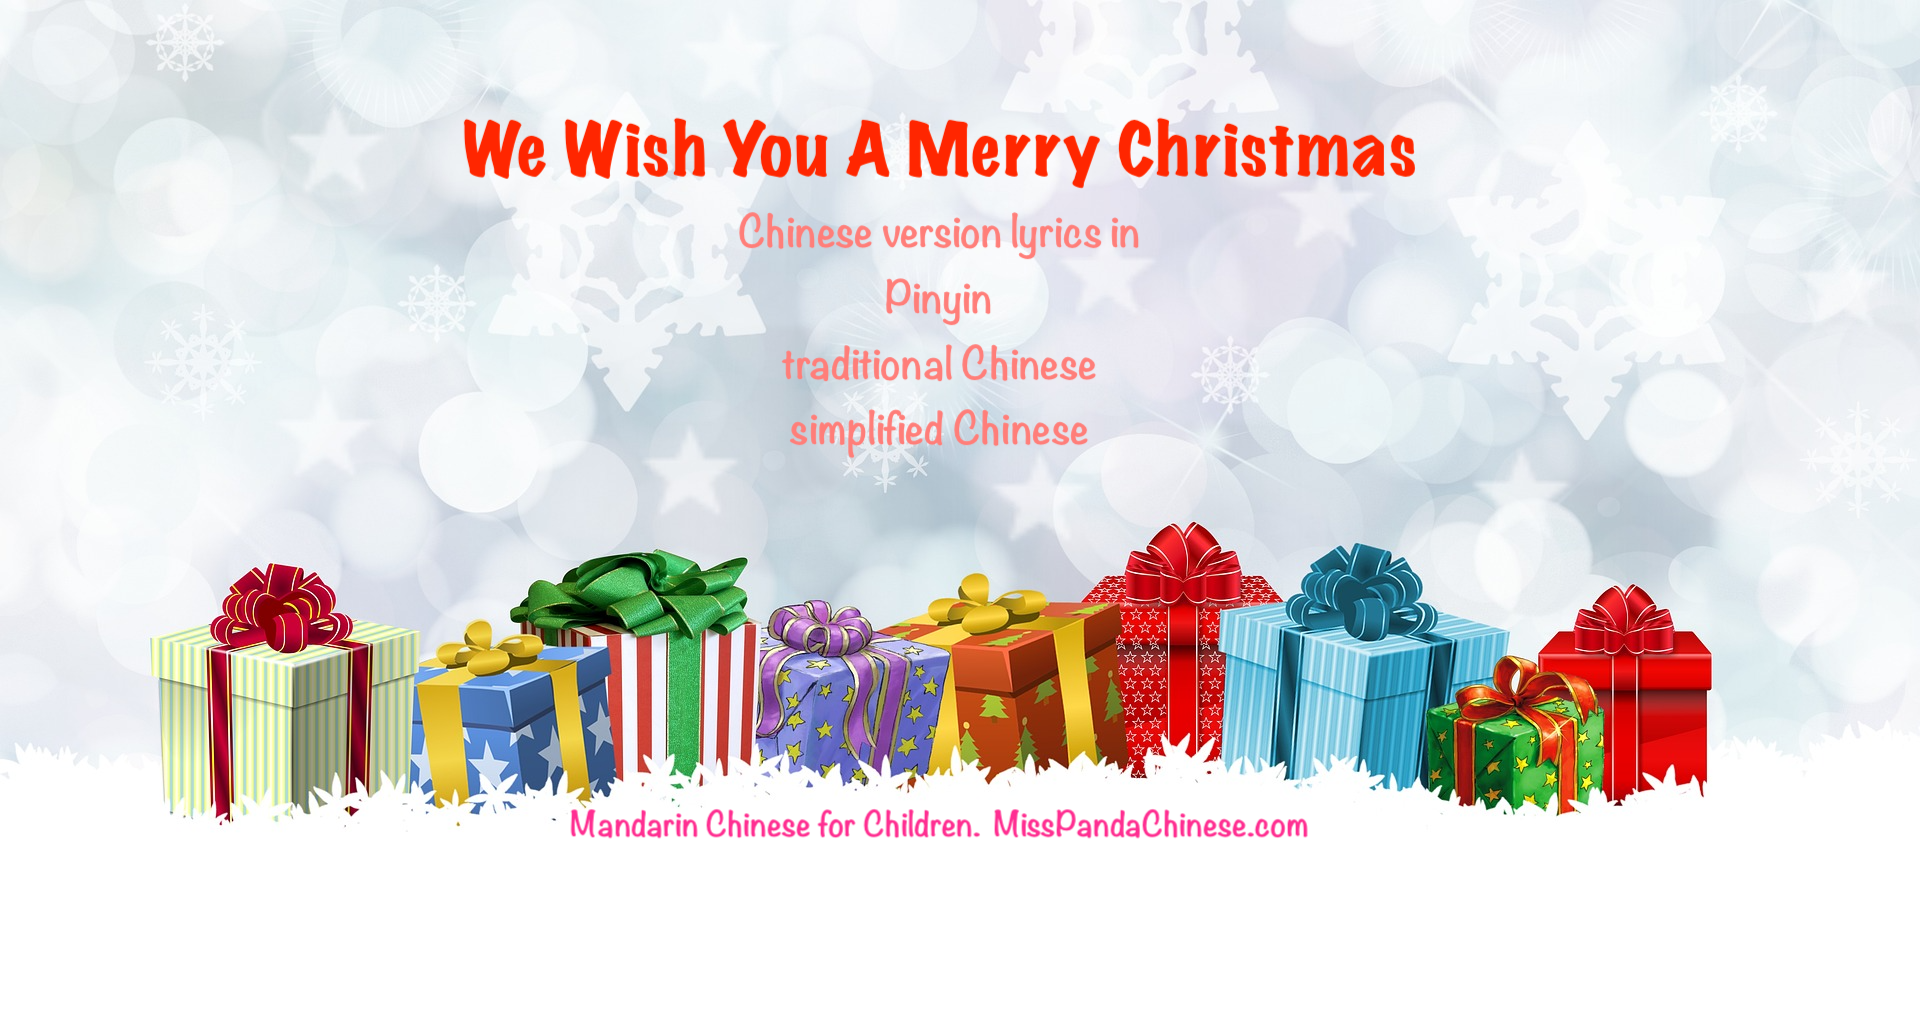 we wish you a merry christmas and a happy new year lyrics